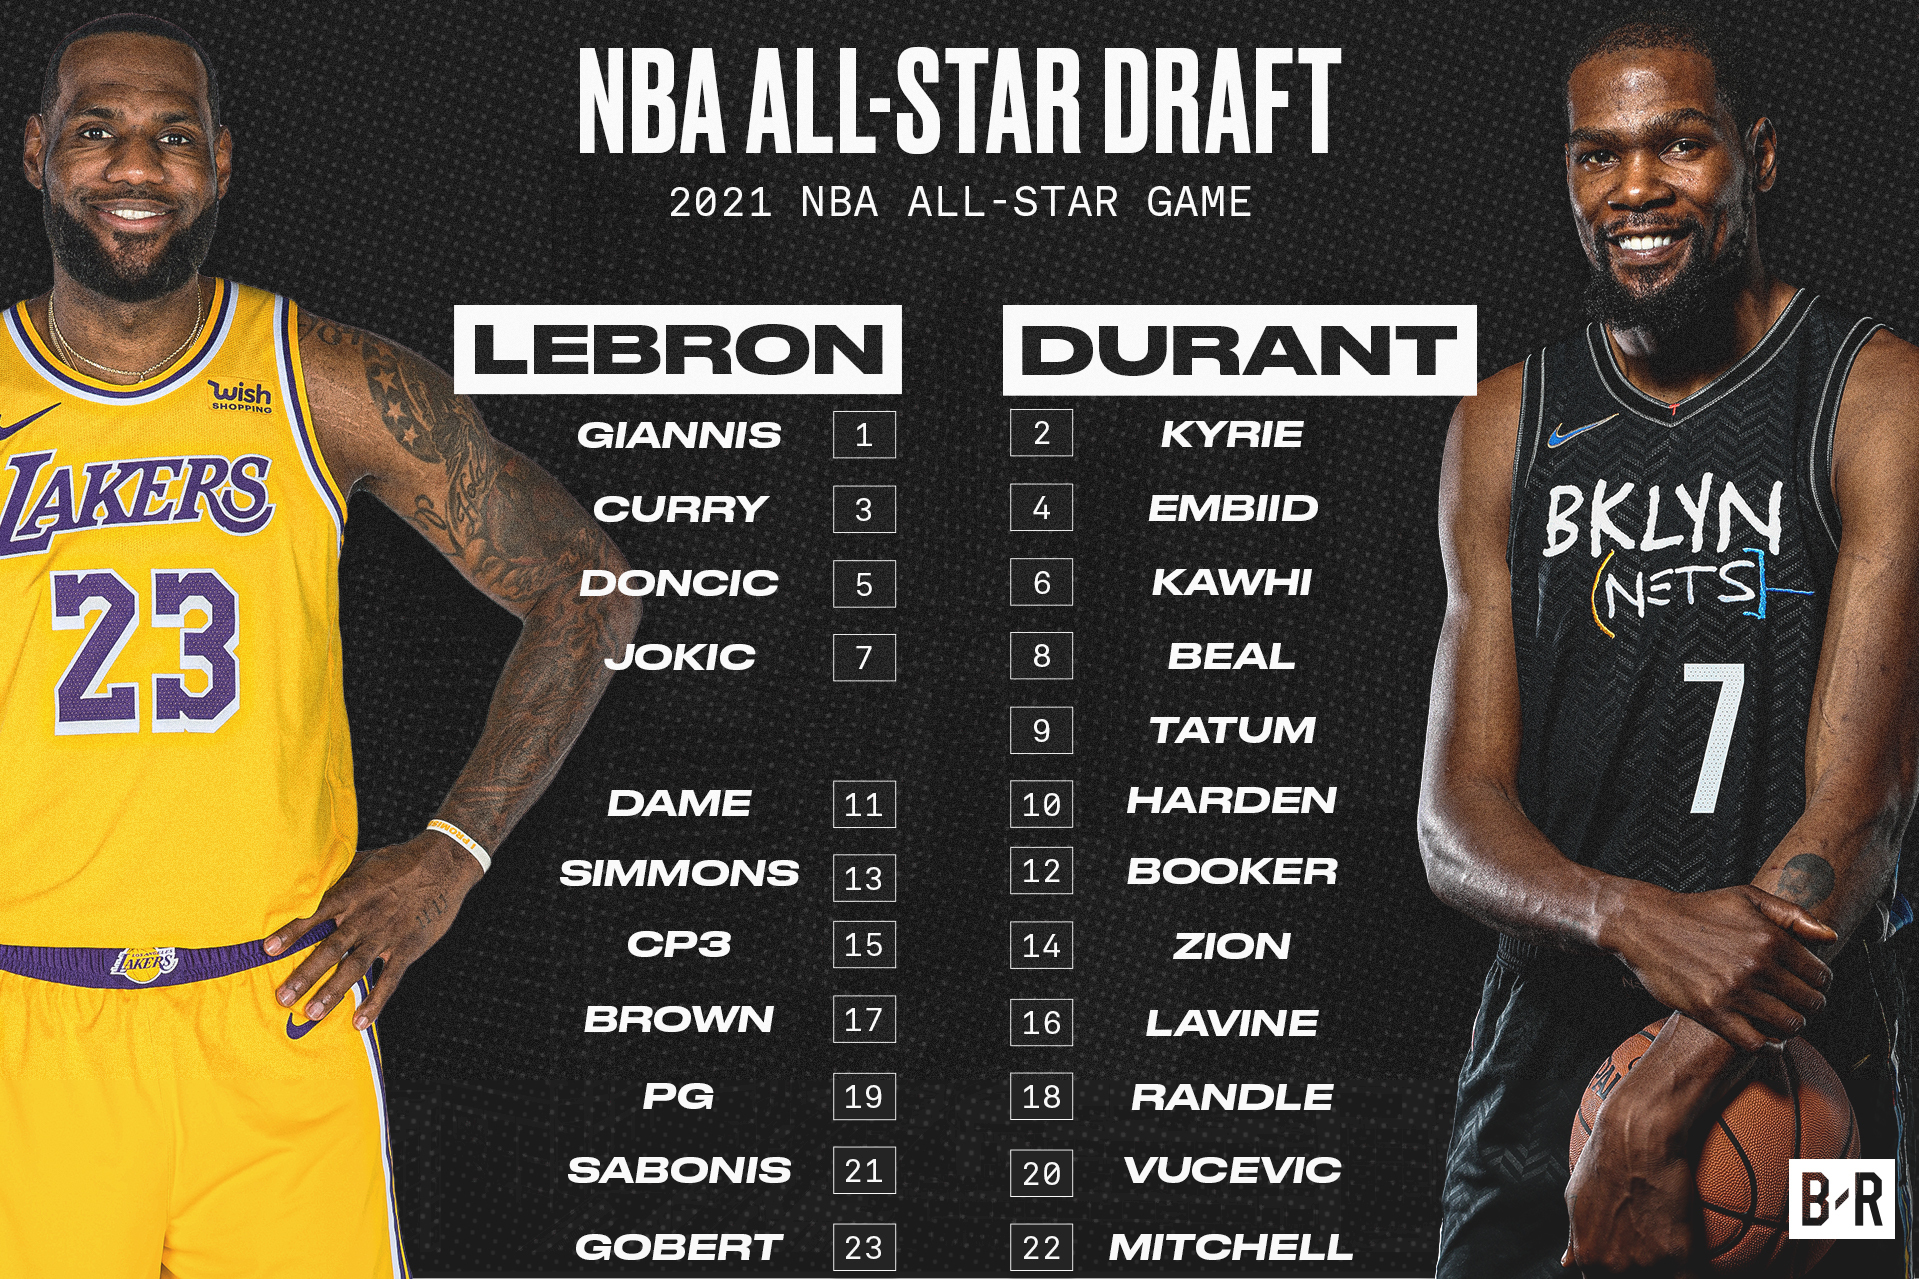 Nba All Star Game 2021 Rosters Revealed After Lebron Vs Durant Draft Bleacher Report Latest News Videos And Highlights